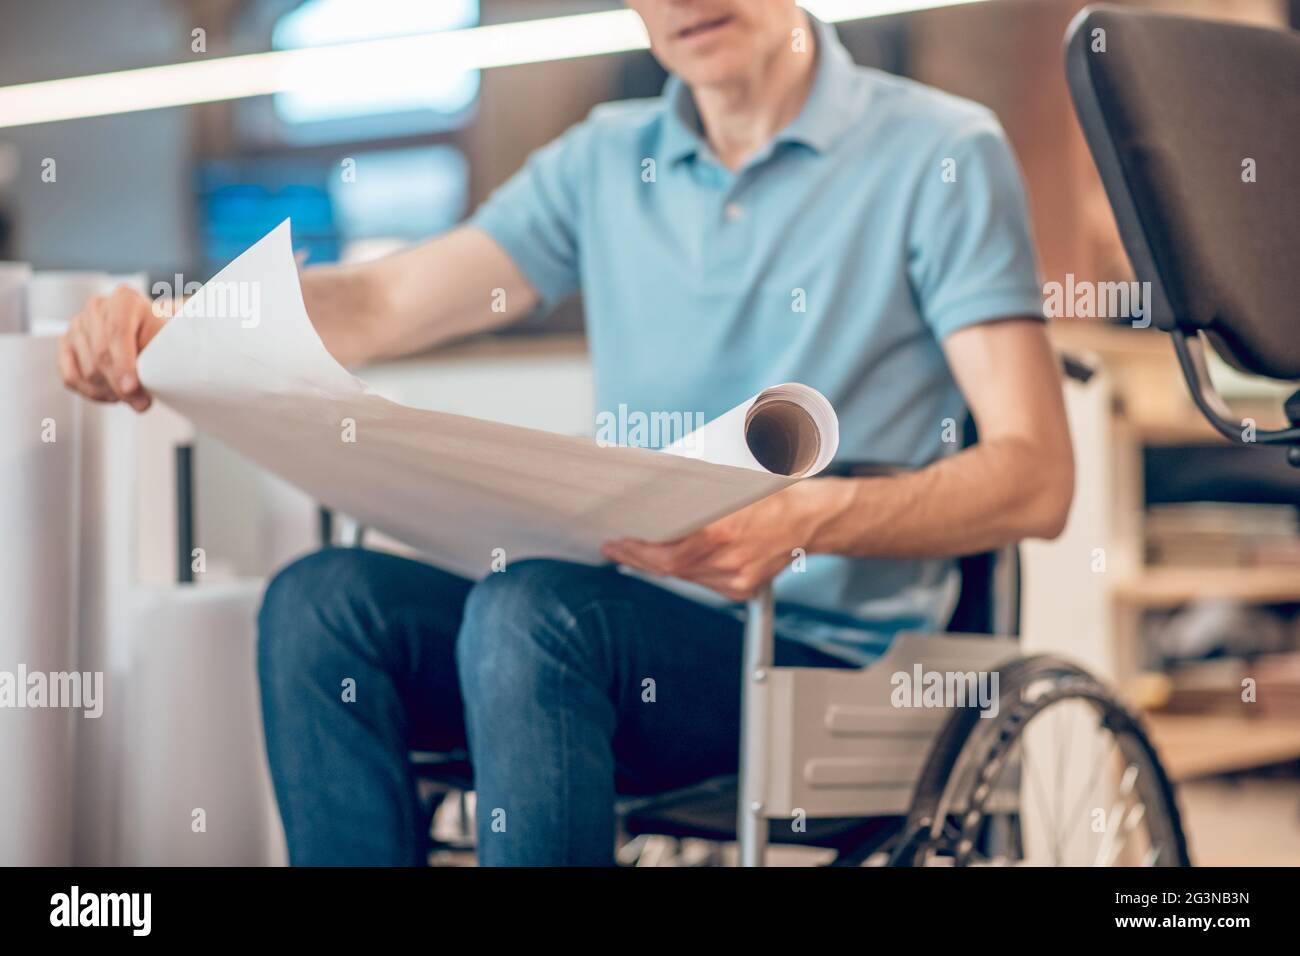 Roll of paper in hands of man on wheelchair Stock Photo